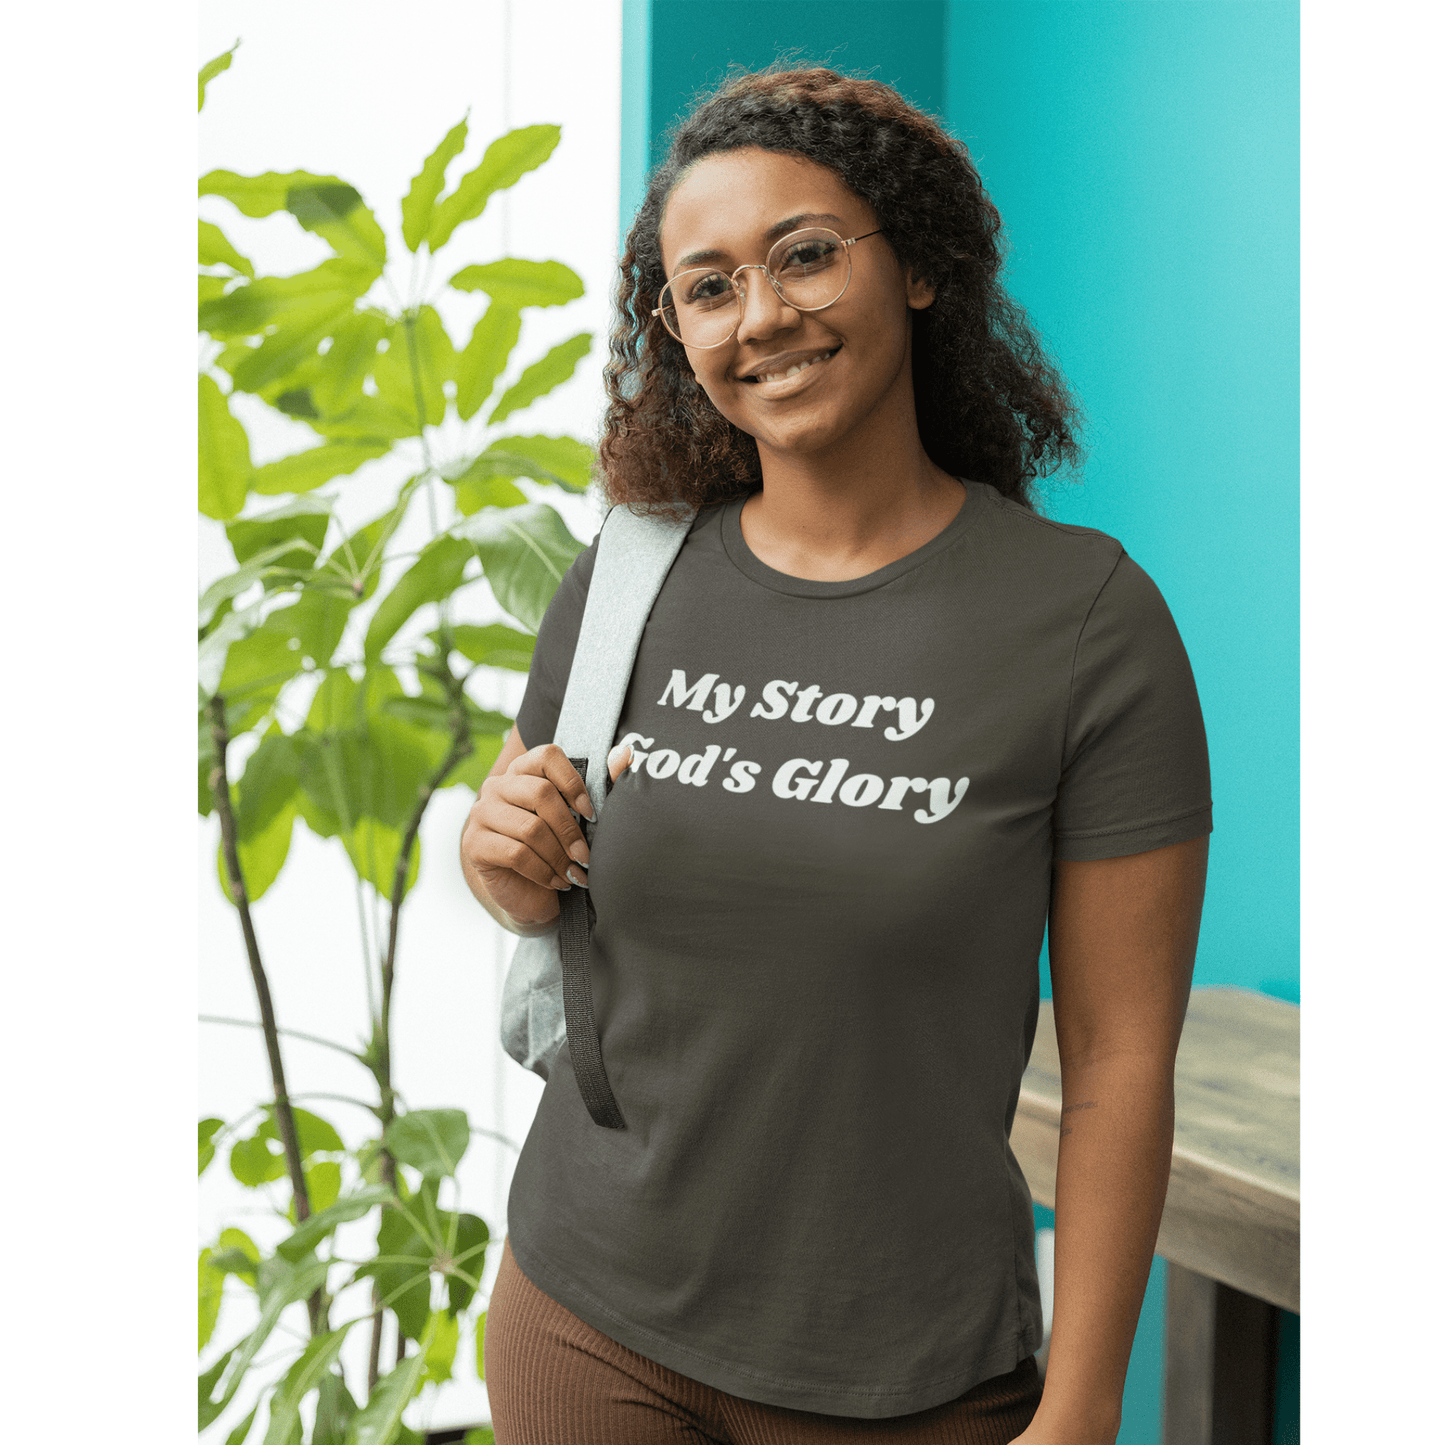 My Story, God's Glory (Graphic White Text) Unisex Jersey Short Sleeve Tee - Style: Bella+Canvas 3001